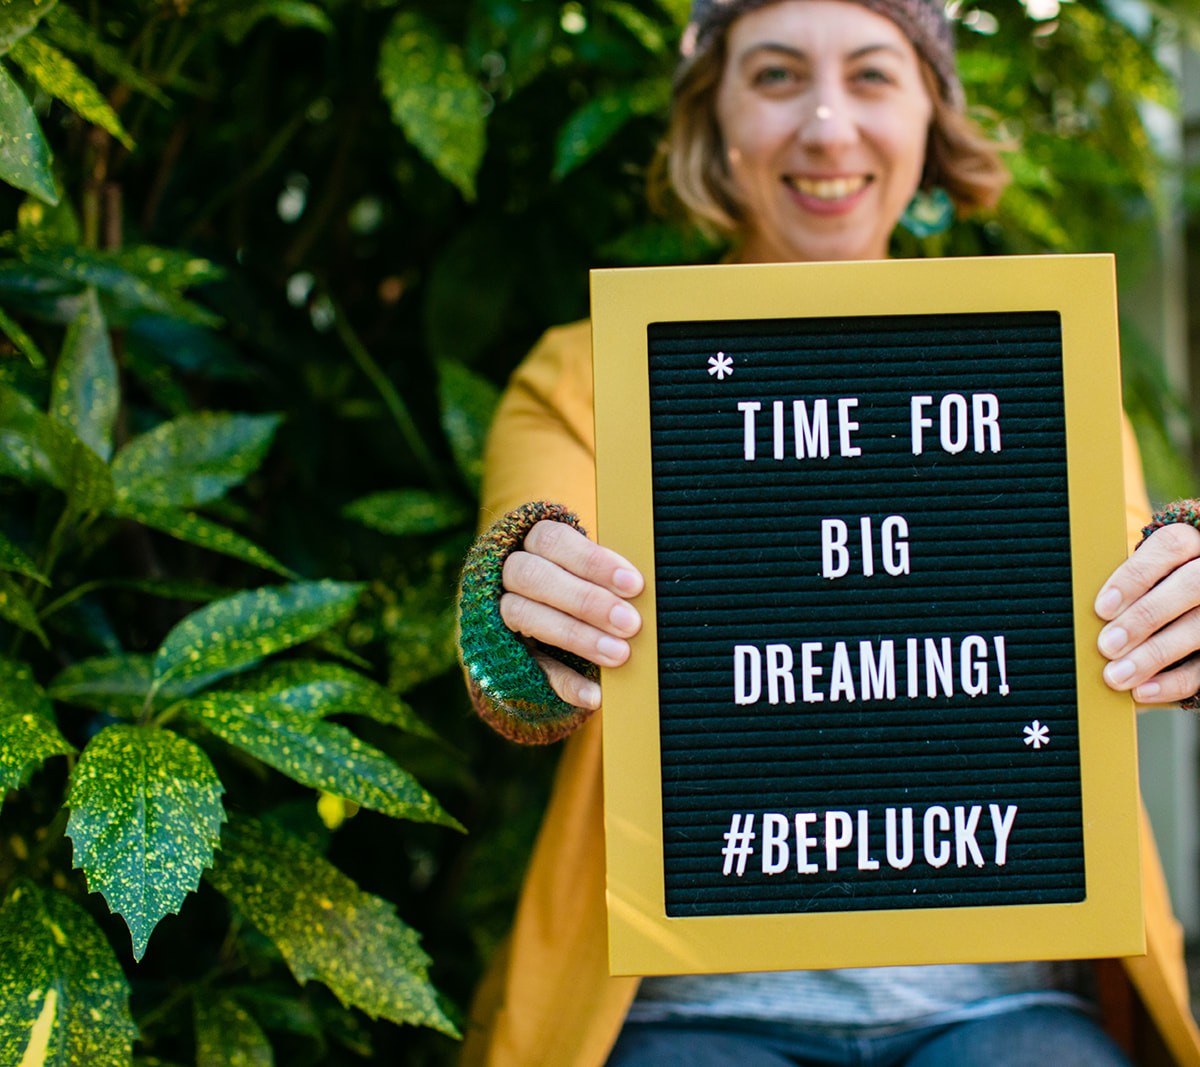 Coach Jen Dary holds a sign that says "Time for Big Dreaming" #BePlucky